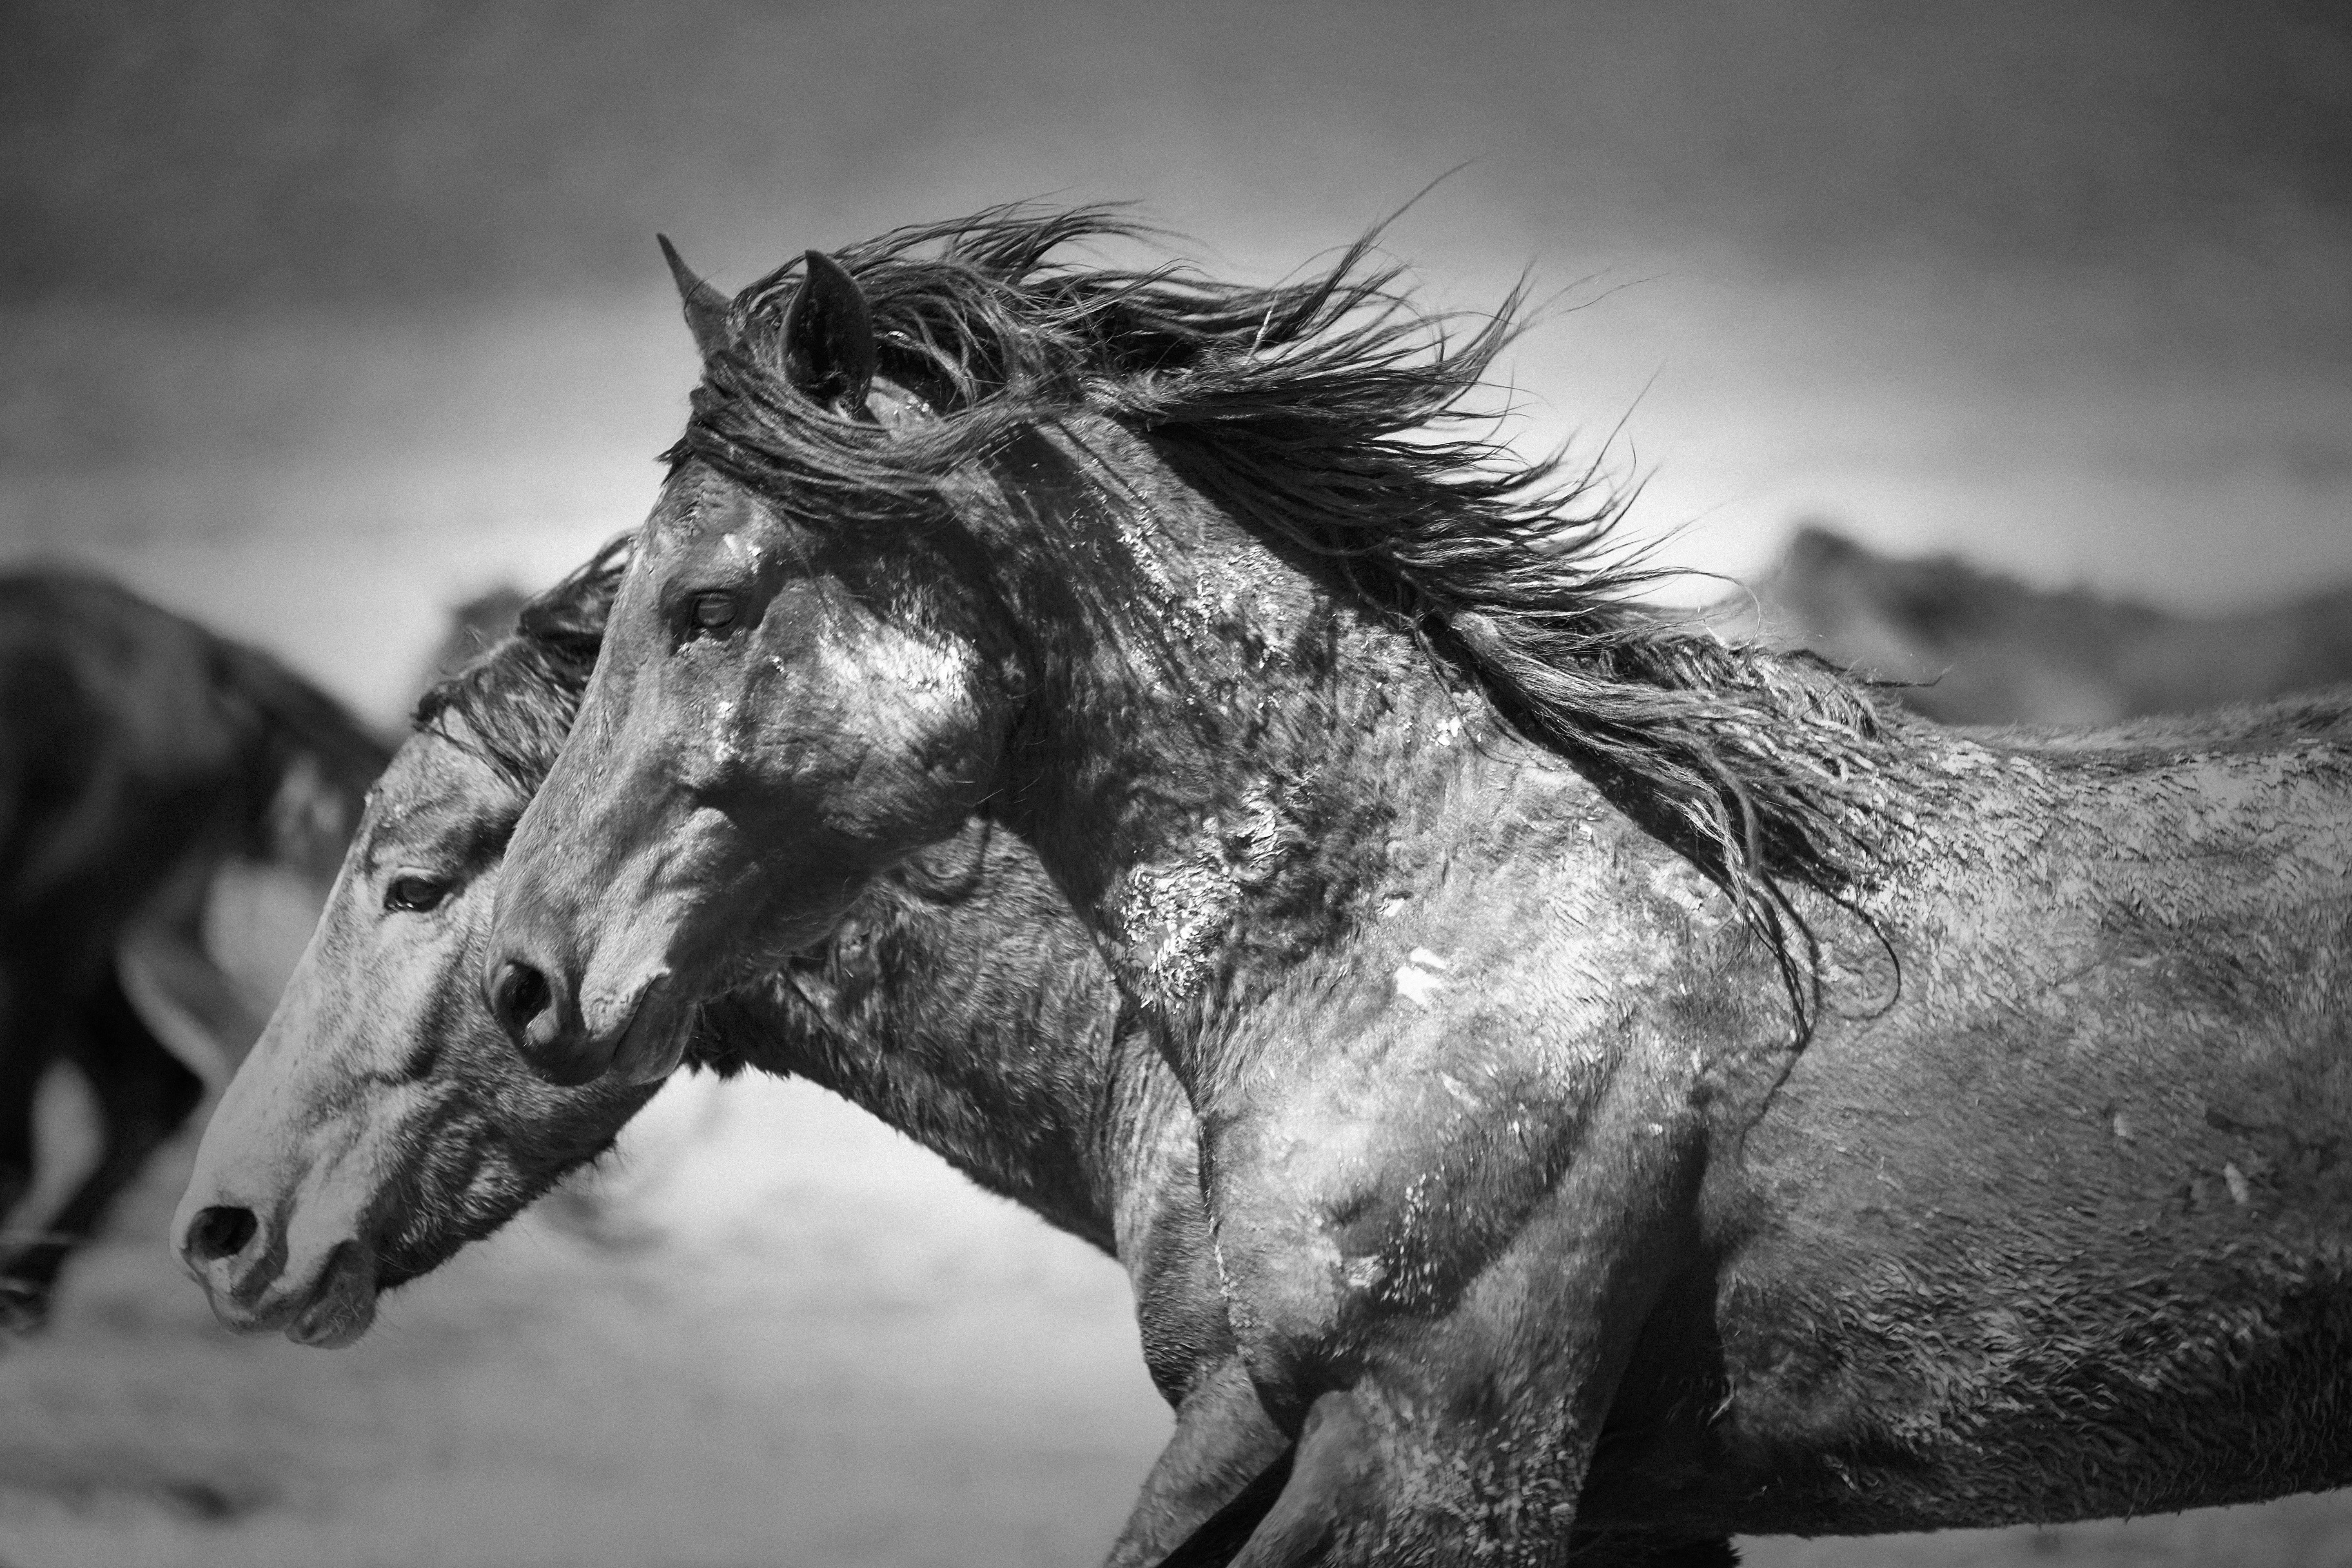 Shane Russeck Black and White Photograph - Statuesque 40x60 Back and White Photography Photography of Wild Horses Mustangs